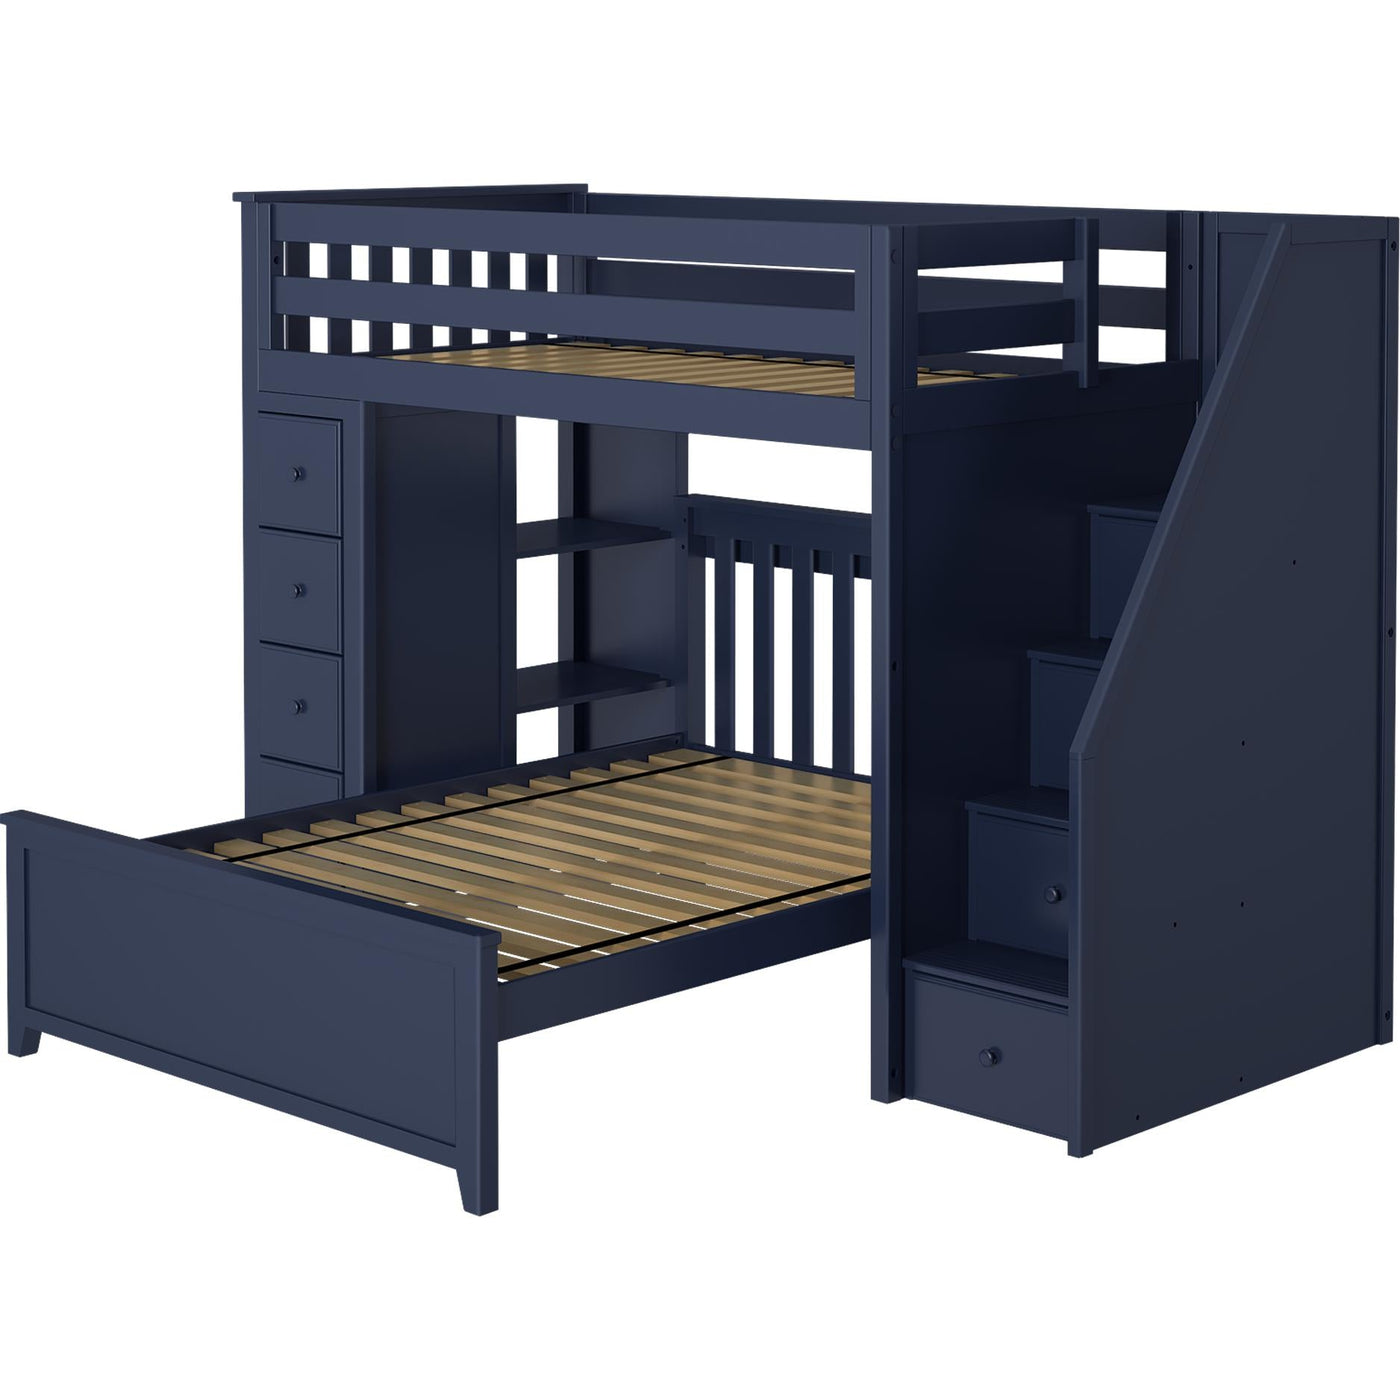 Jackpot Deluxe "CHESTER 3" Staircase Loft Bed Storage + Twin Bed